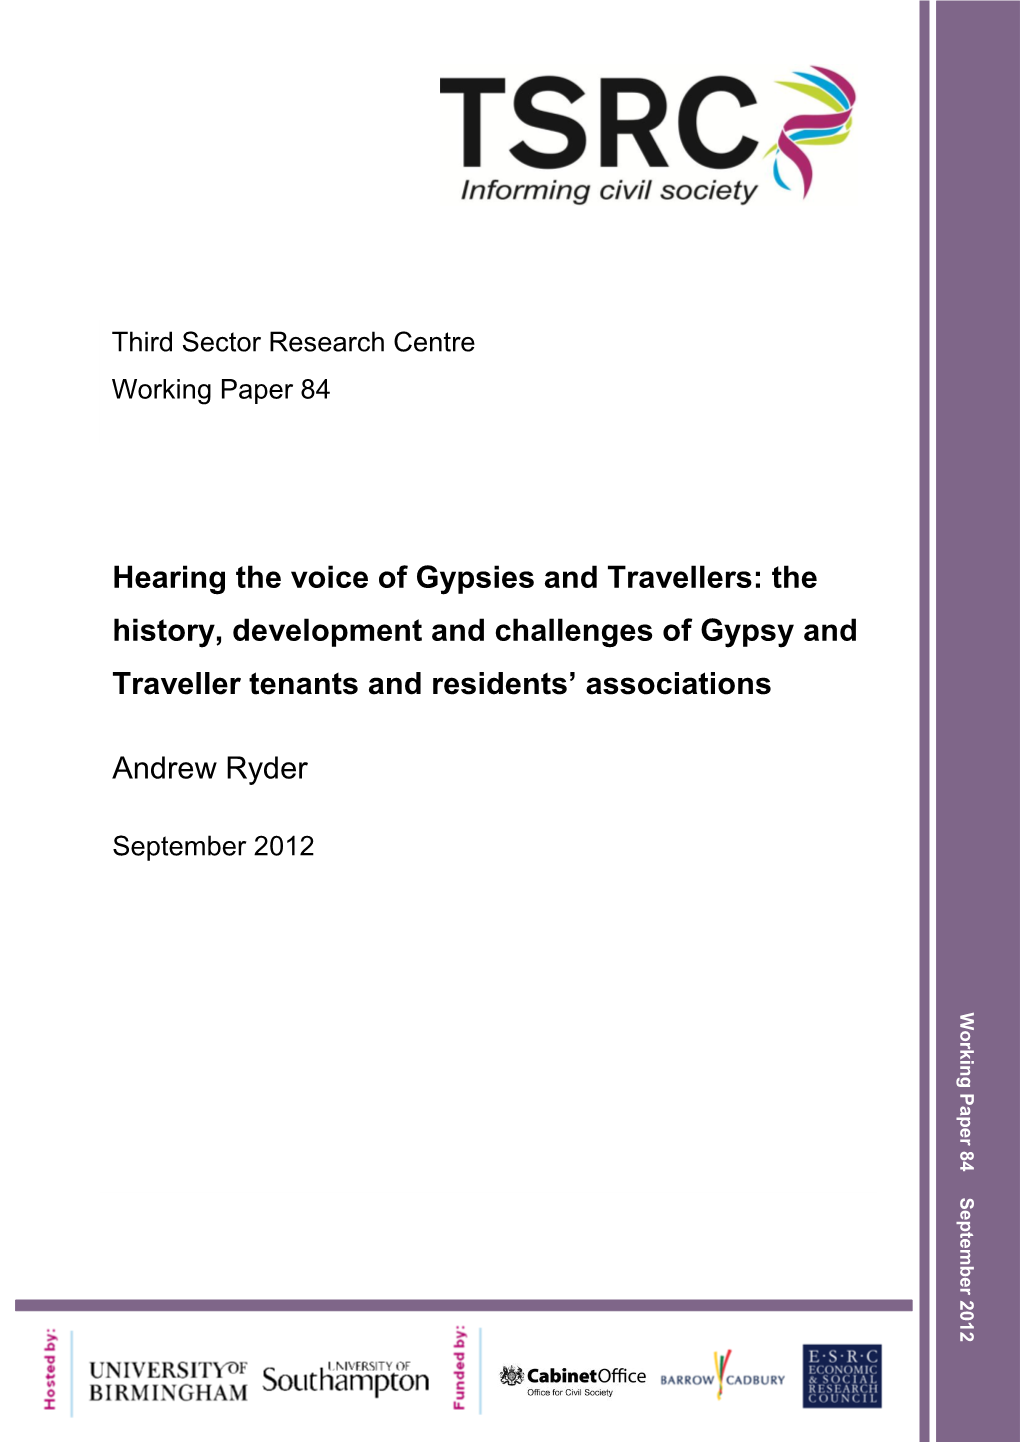 Hearing the Voice of Gypsies and Travellers: the History, Development and Challenges of Gypsy and Traveller Tenants and Residents’ Associations